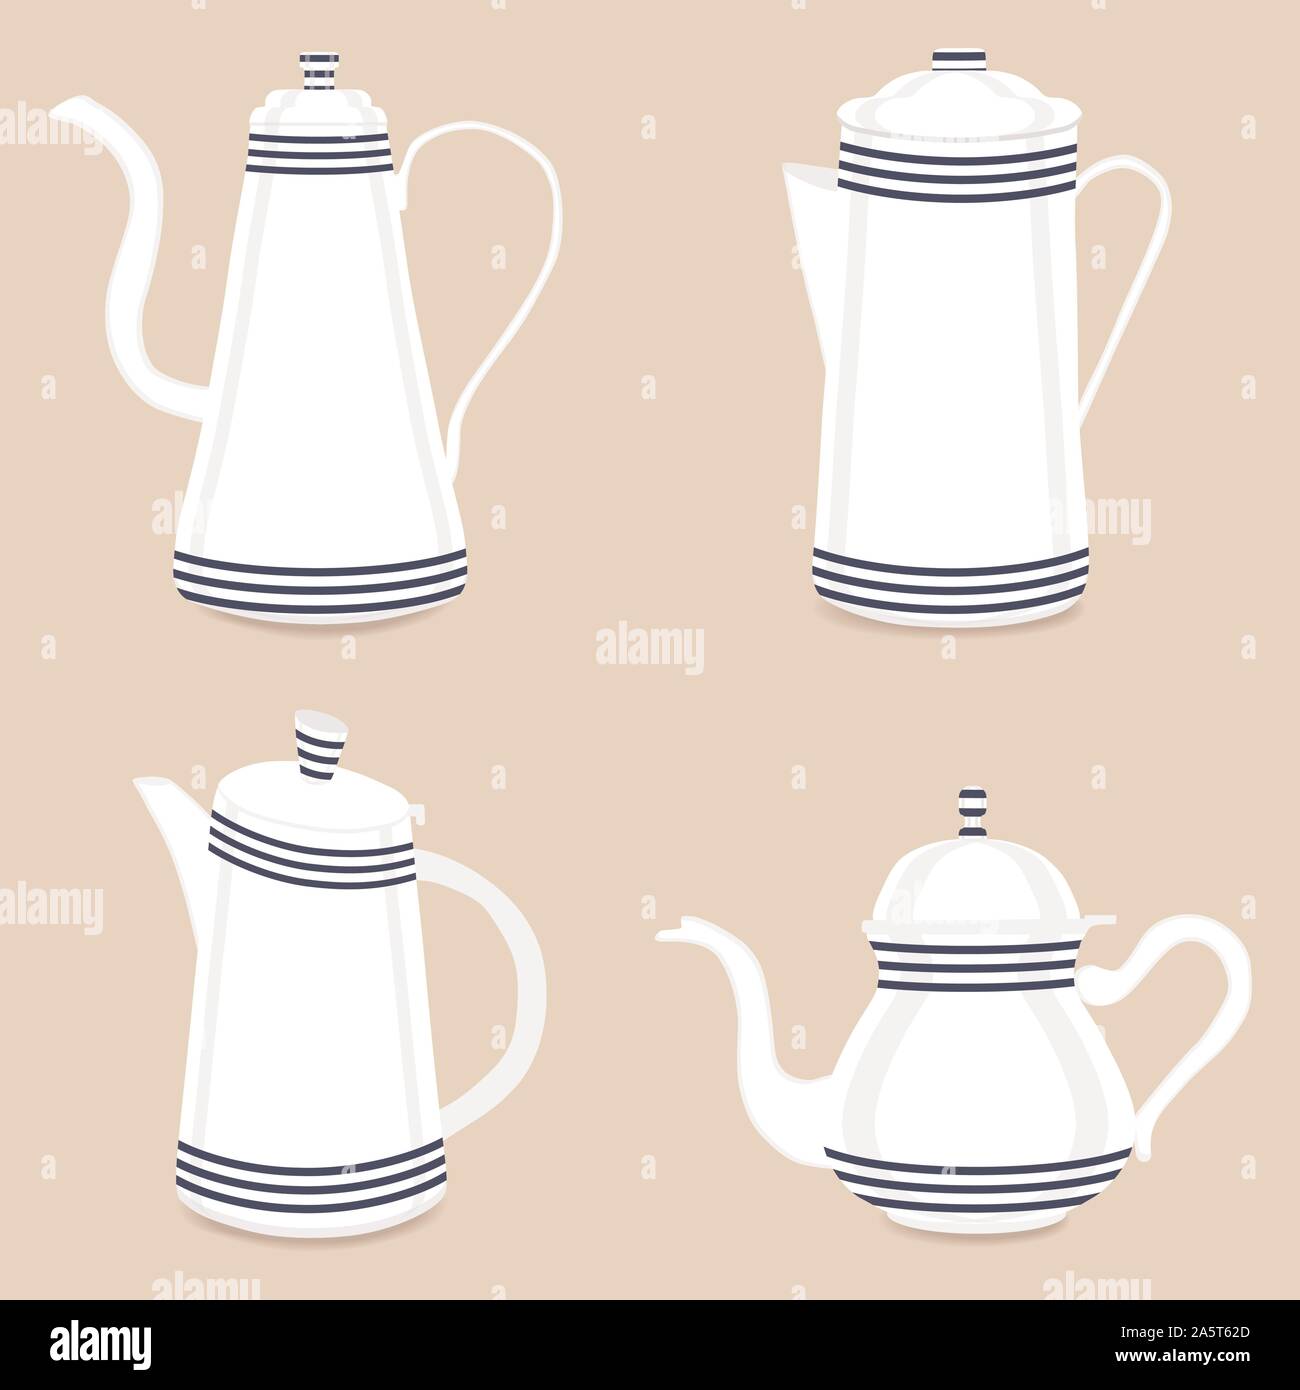 Abstract vector illustration logo for ceramic teapot, kettle on background. Teapot pattern consisting of glass kettles with handle, lid, spout for dra Stock Vector